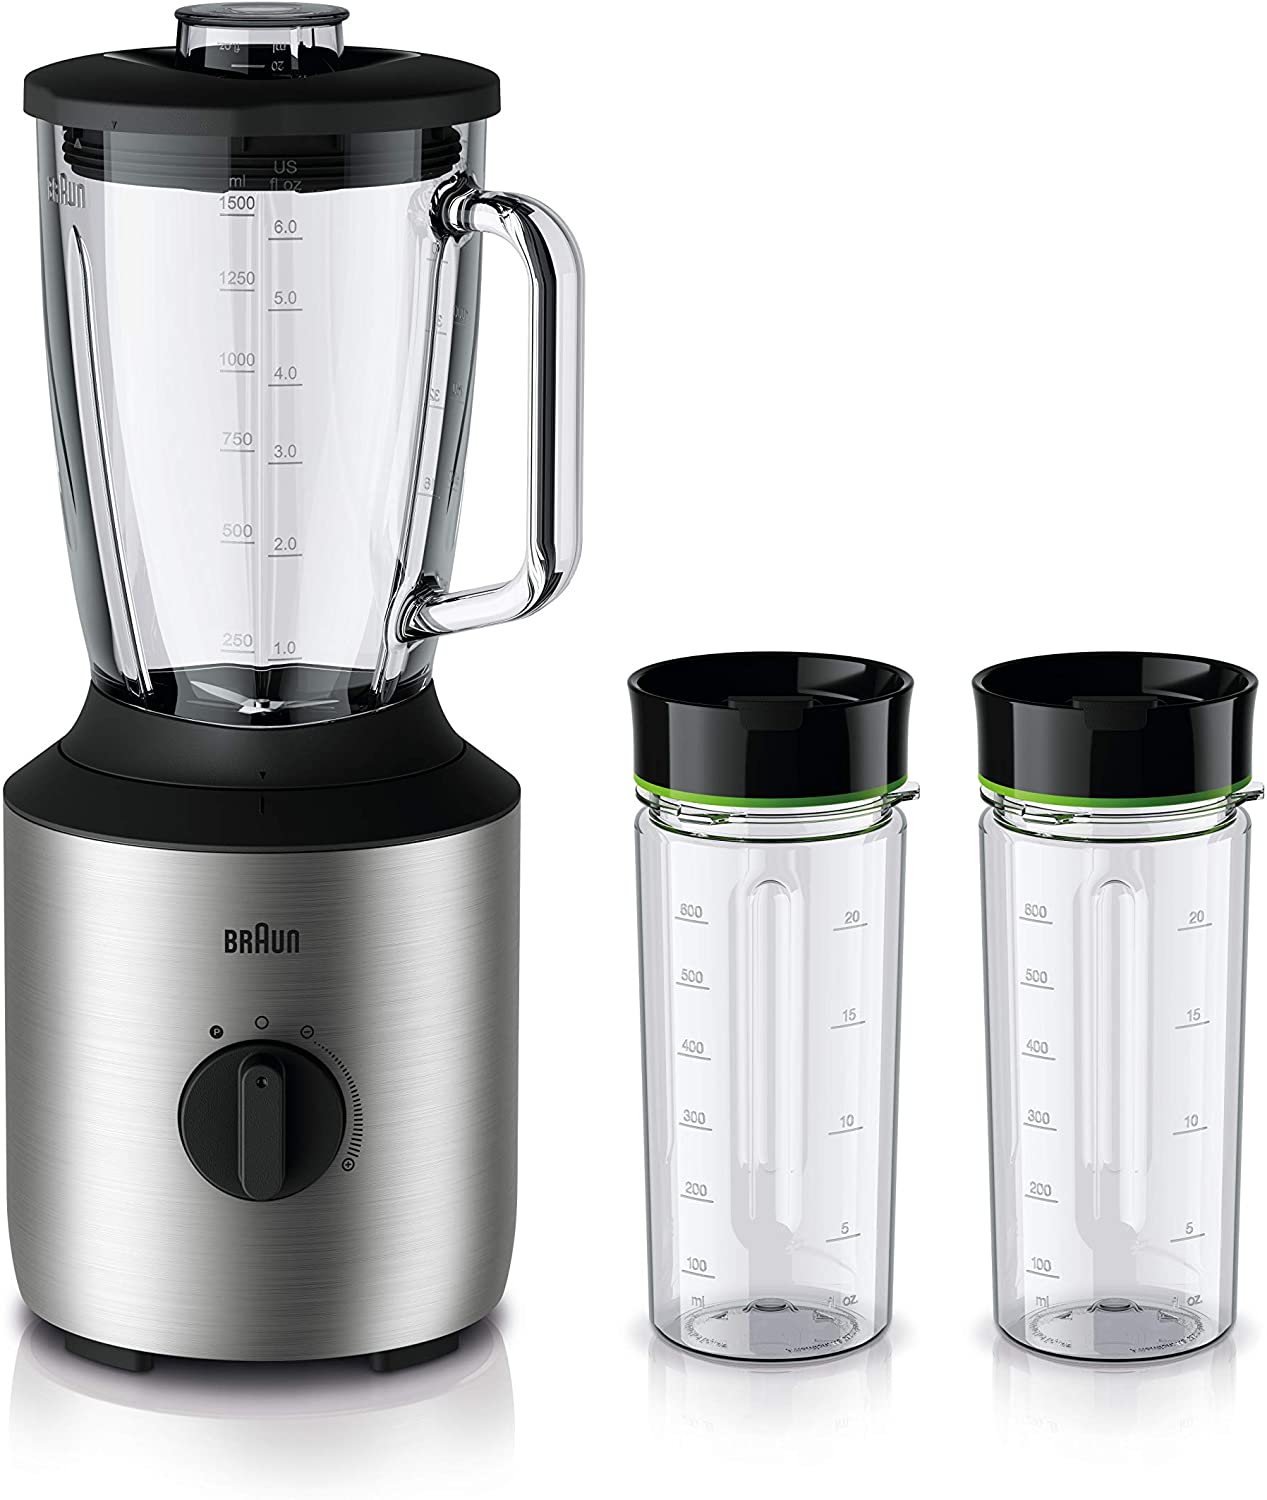 Braun Household Braun PowerBlend 3 JB blender, 1.5 litre glass mixing attachment, kitchen aid for chopping, puréeing & mixing